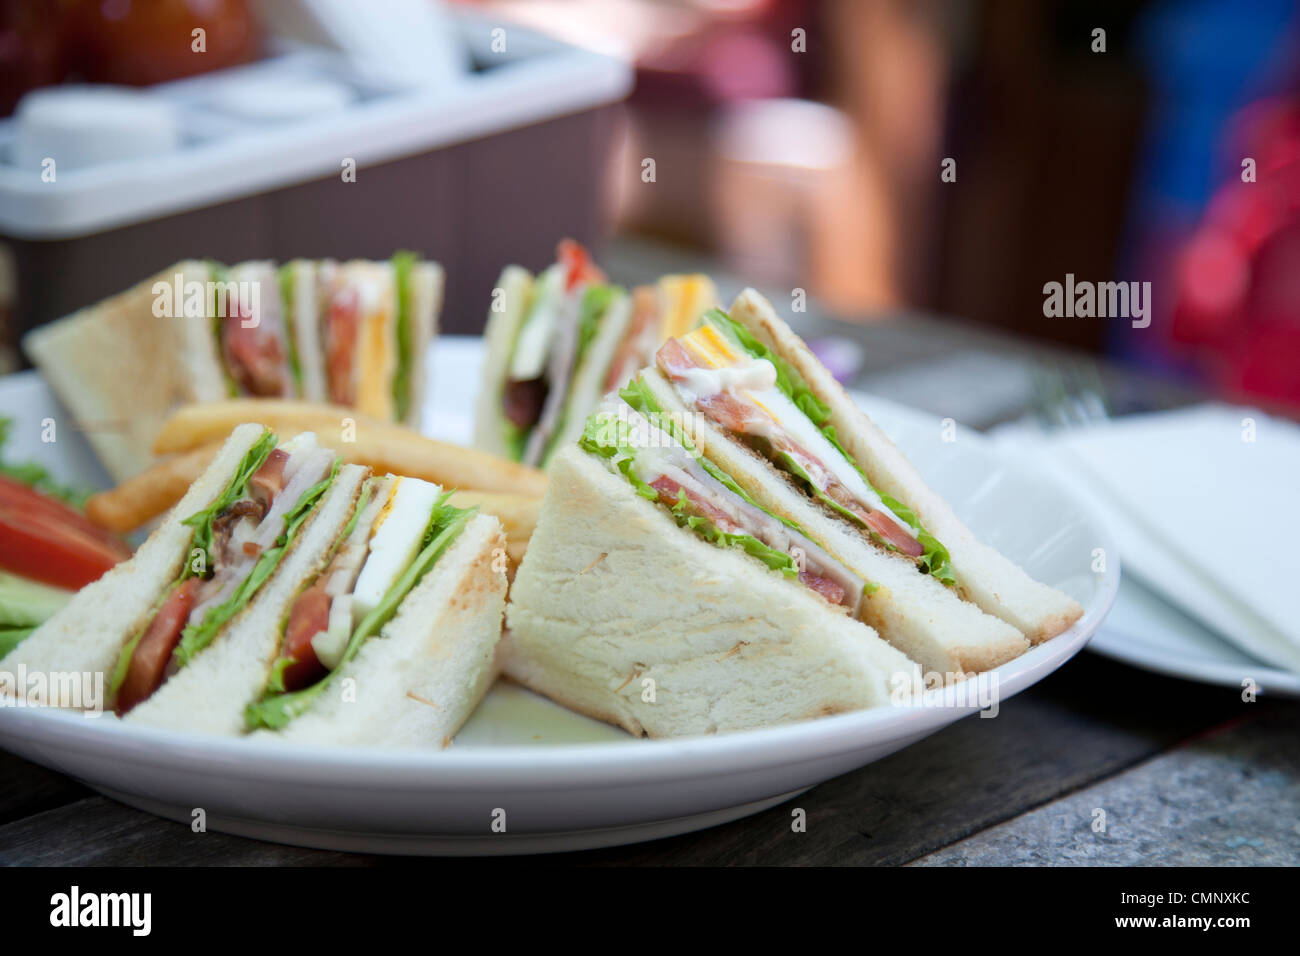 Club sandwich with coffee on wood background Stock Photo